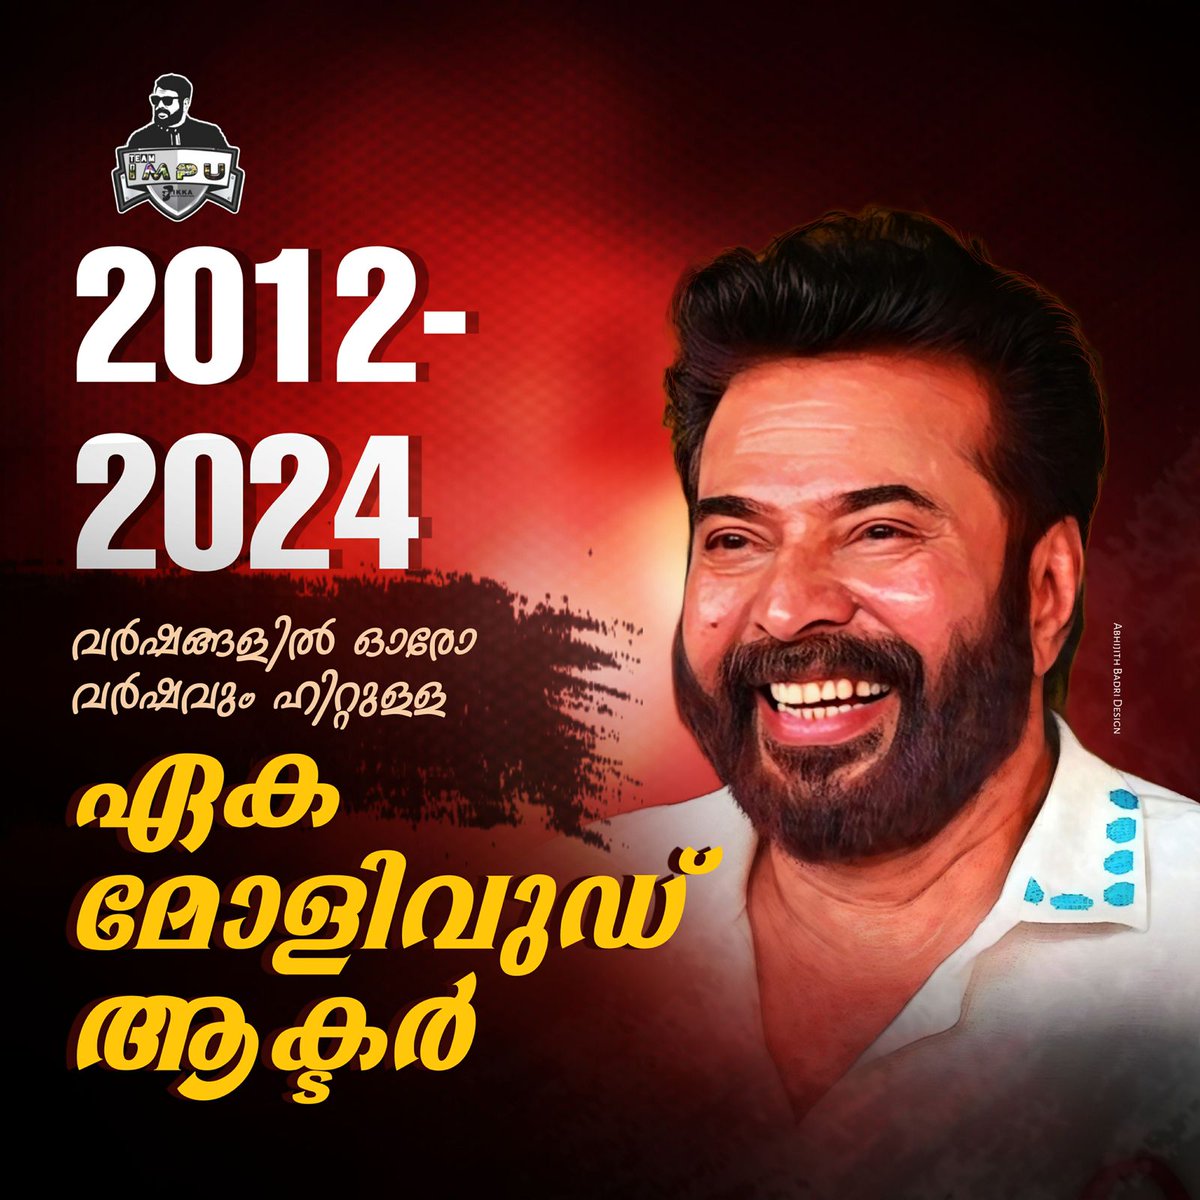 Mammukka is the only actor to have Consistency in both Acting and Box-office🔥

2012 - 2024
#Mammootty #BramayugamOnSonyliv